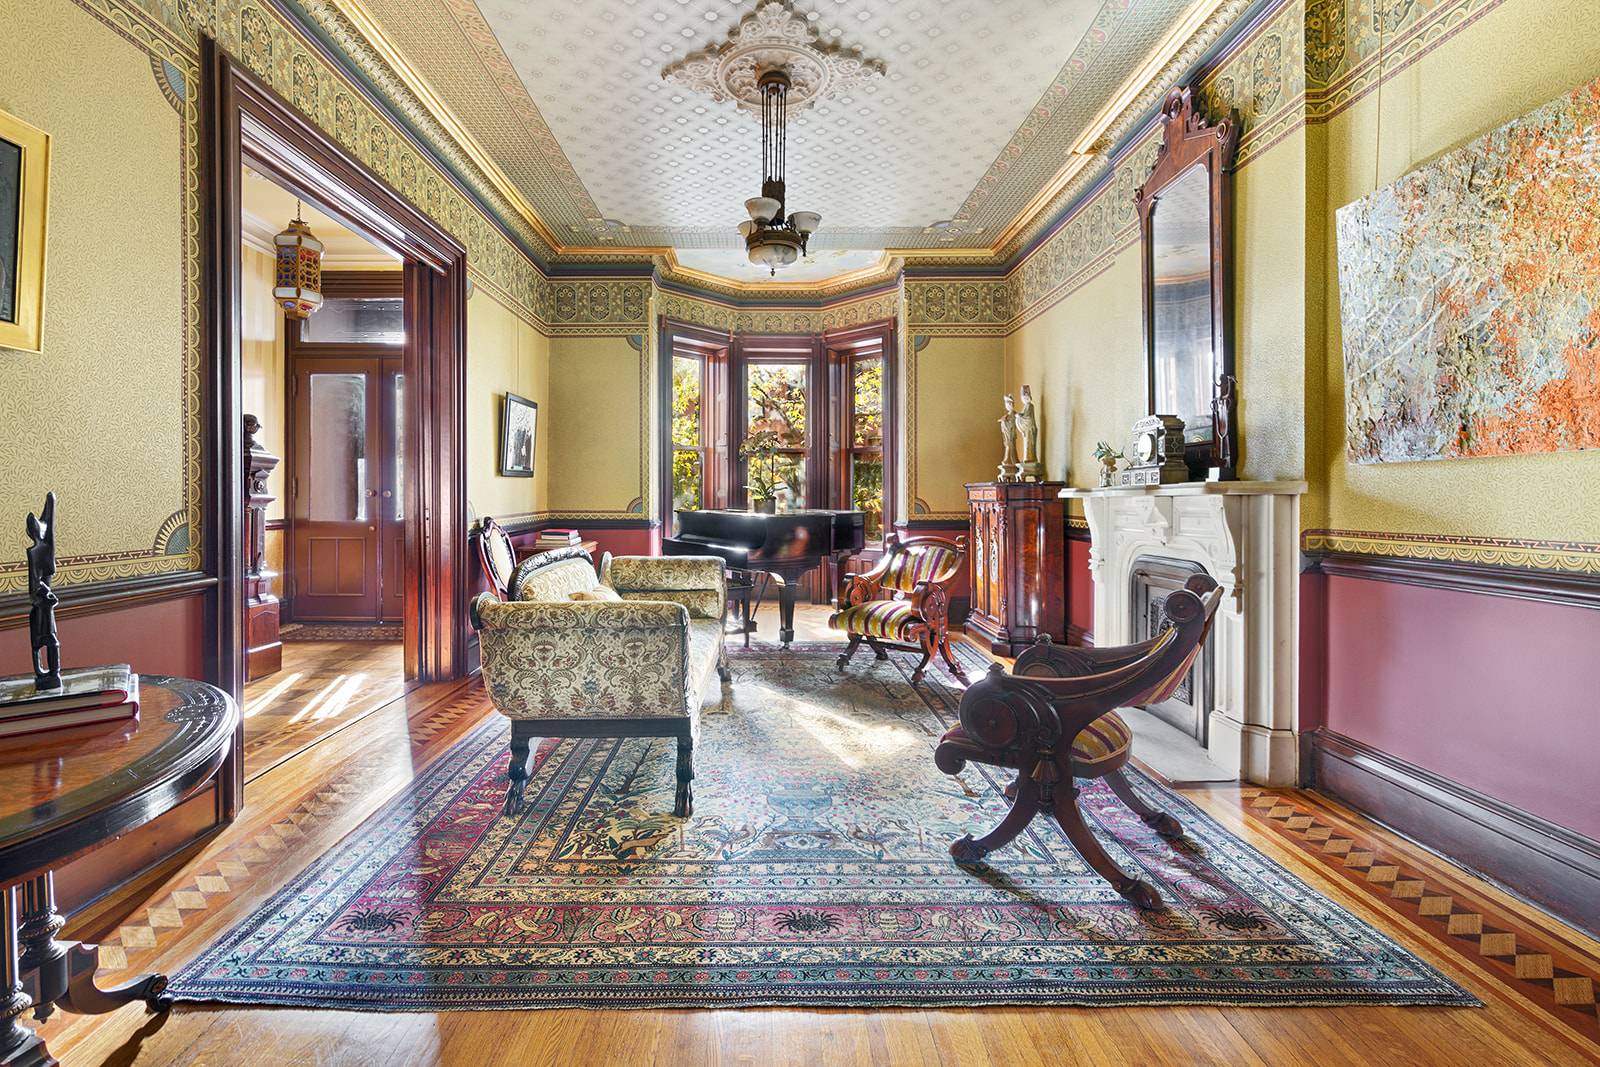 Brooklyn grandeur at its finest exists in this special trophy house that is beyond compare !